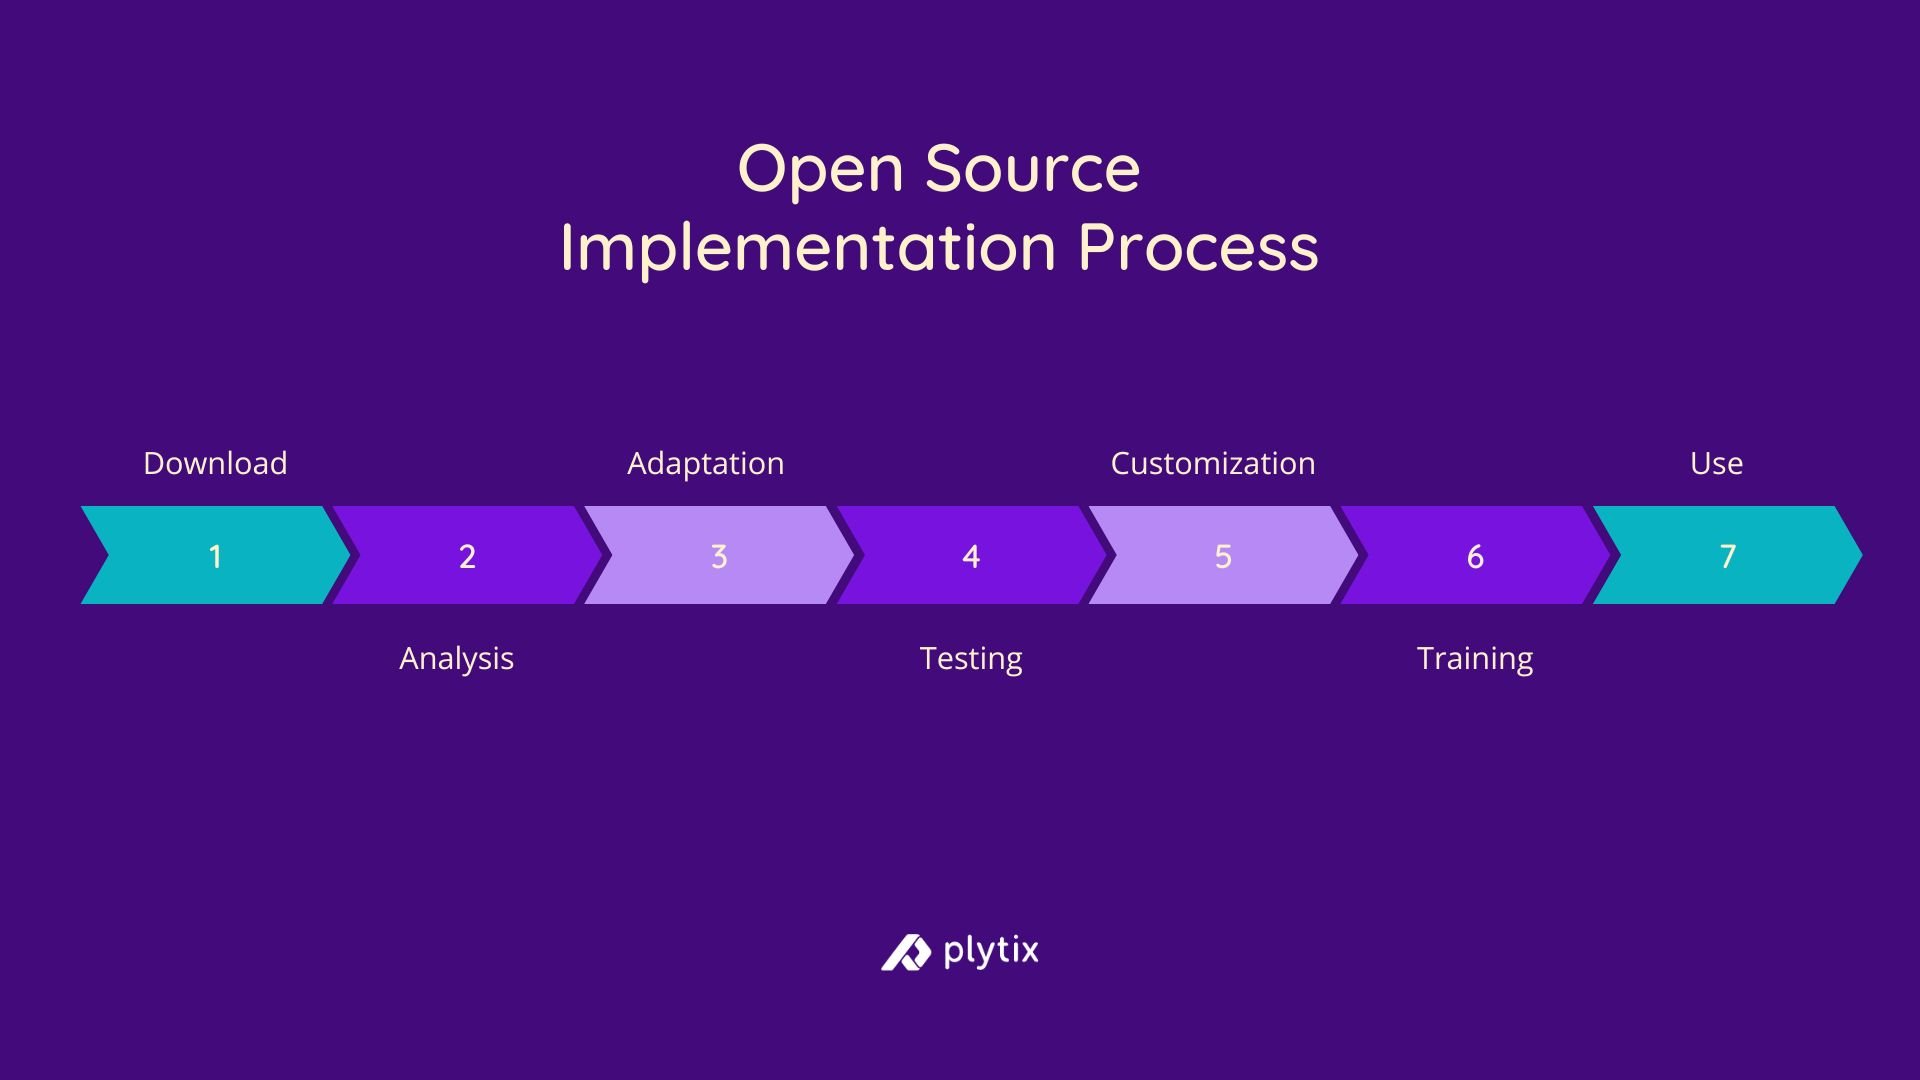 Open source implementation in 7 steps